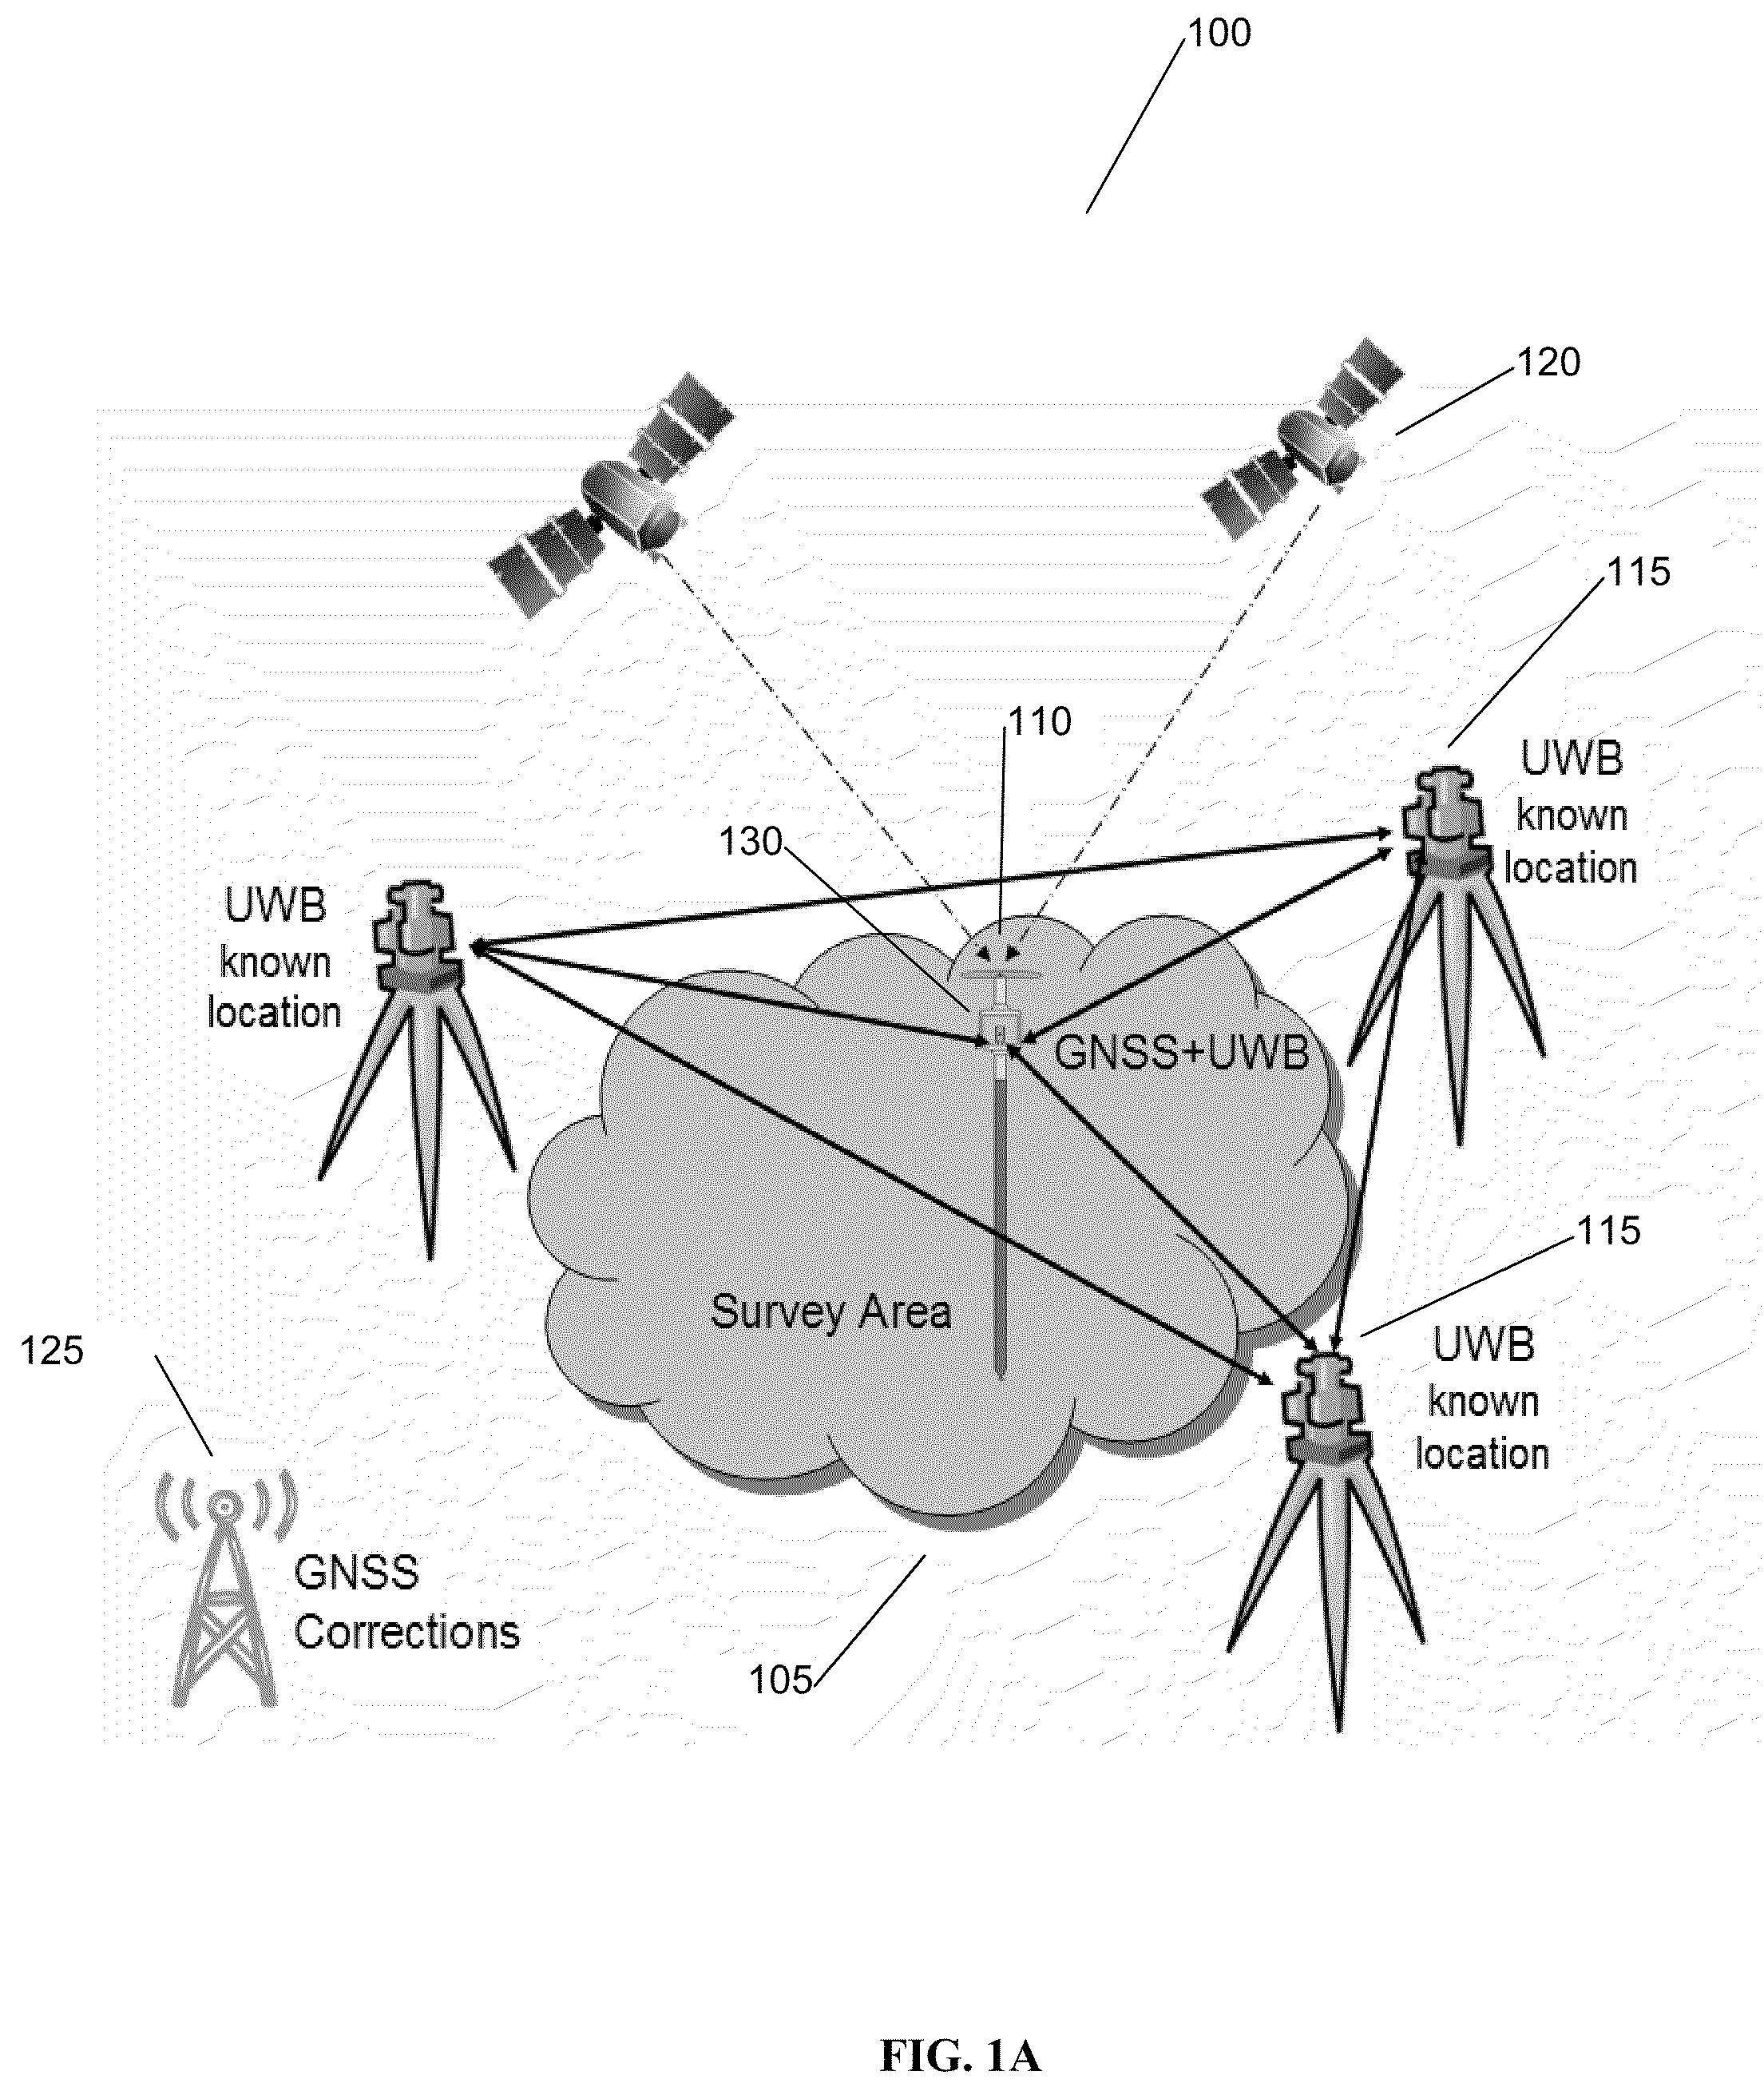 System and Methods for Real Time Kinematic Surveying Using GNSS and Ultra Wideband Ranging